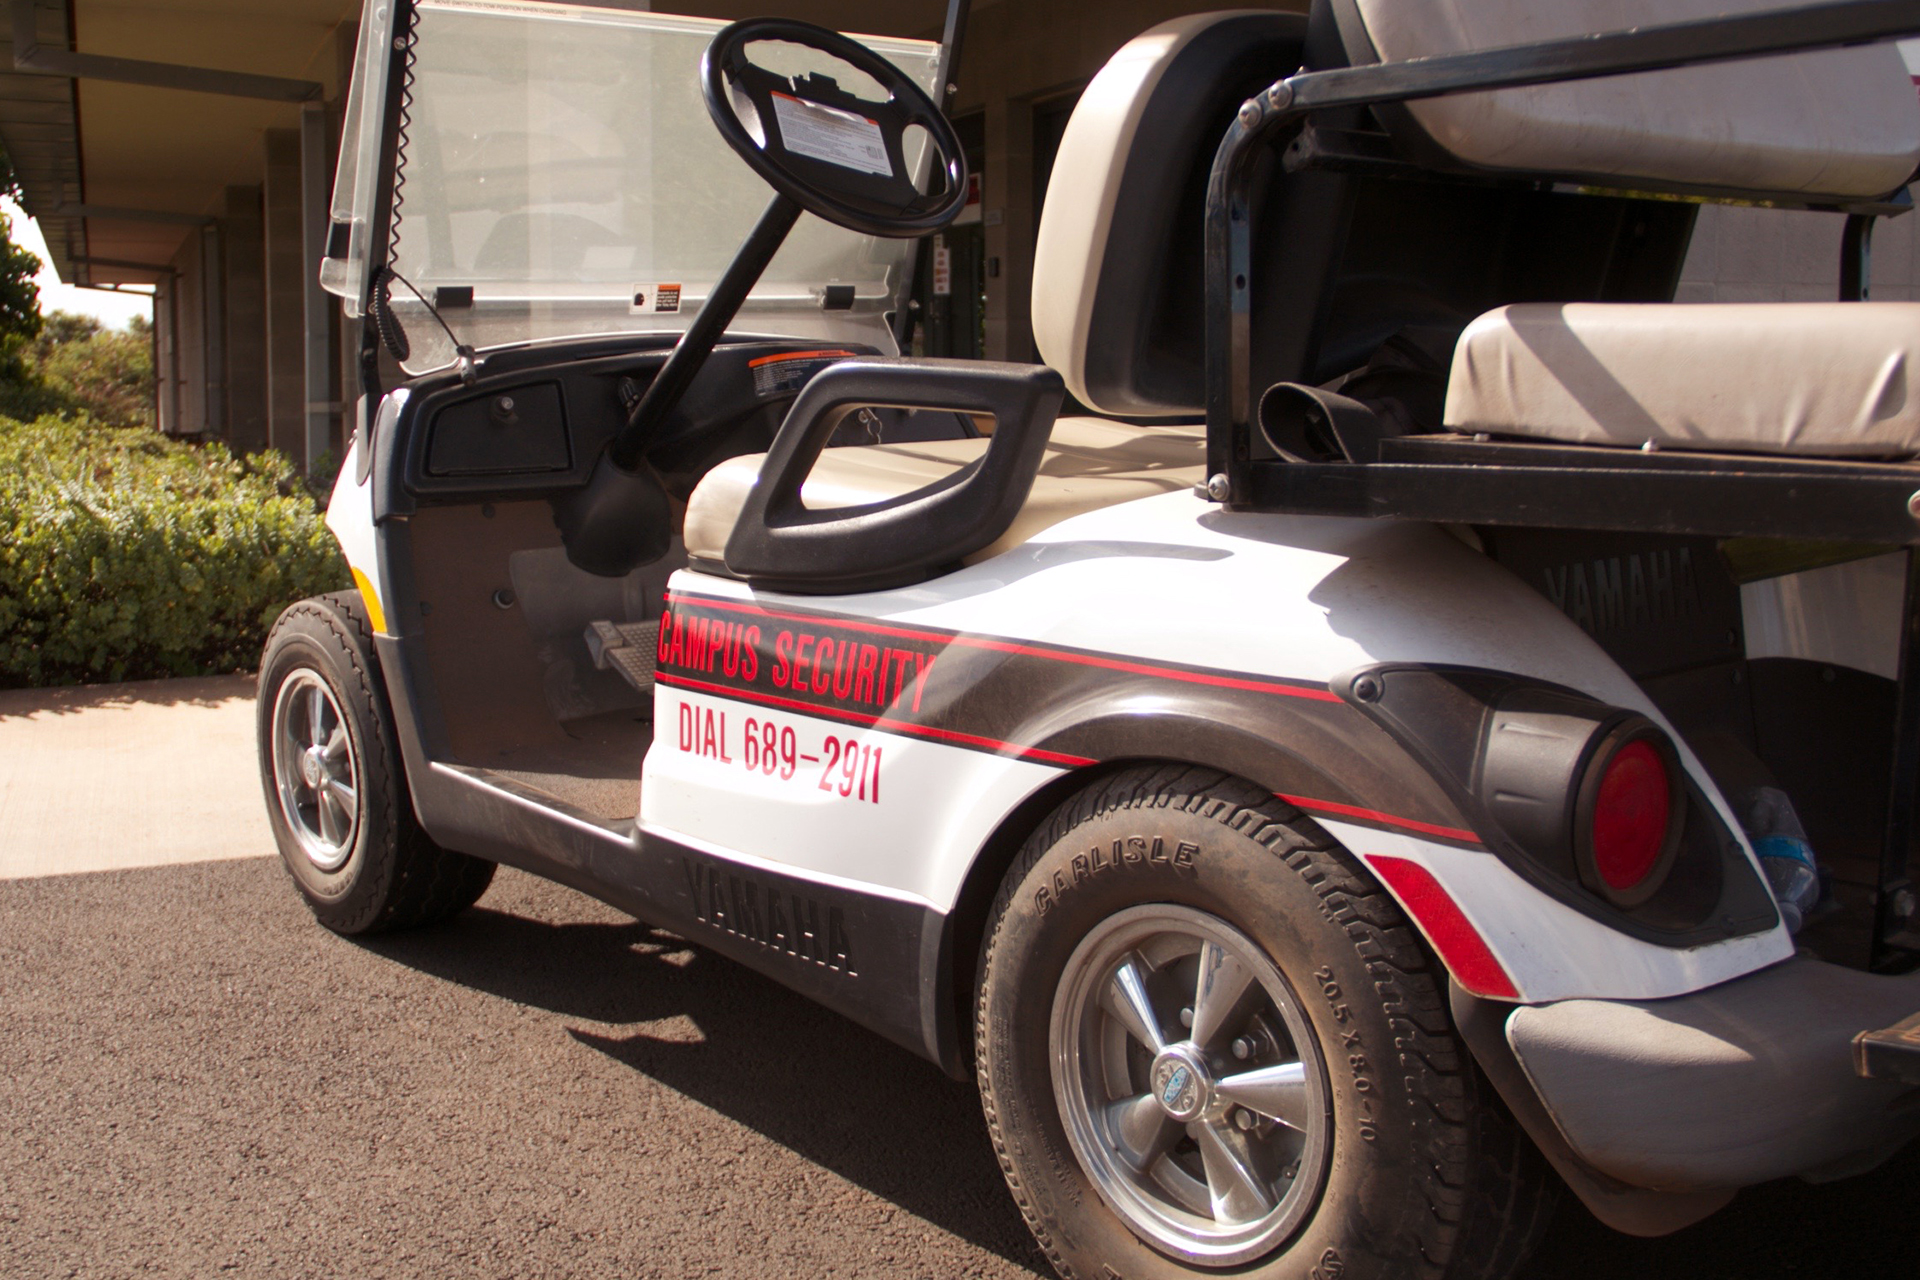 A close-up of a UH West Oahu security golf cart with the words Campus Security Dial 689-2911 displayed on the side.